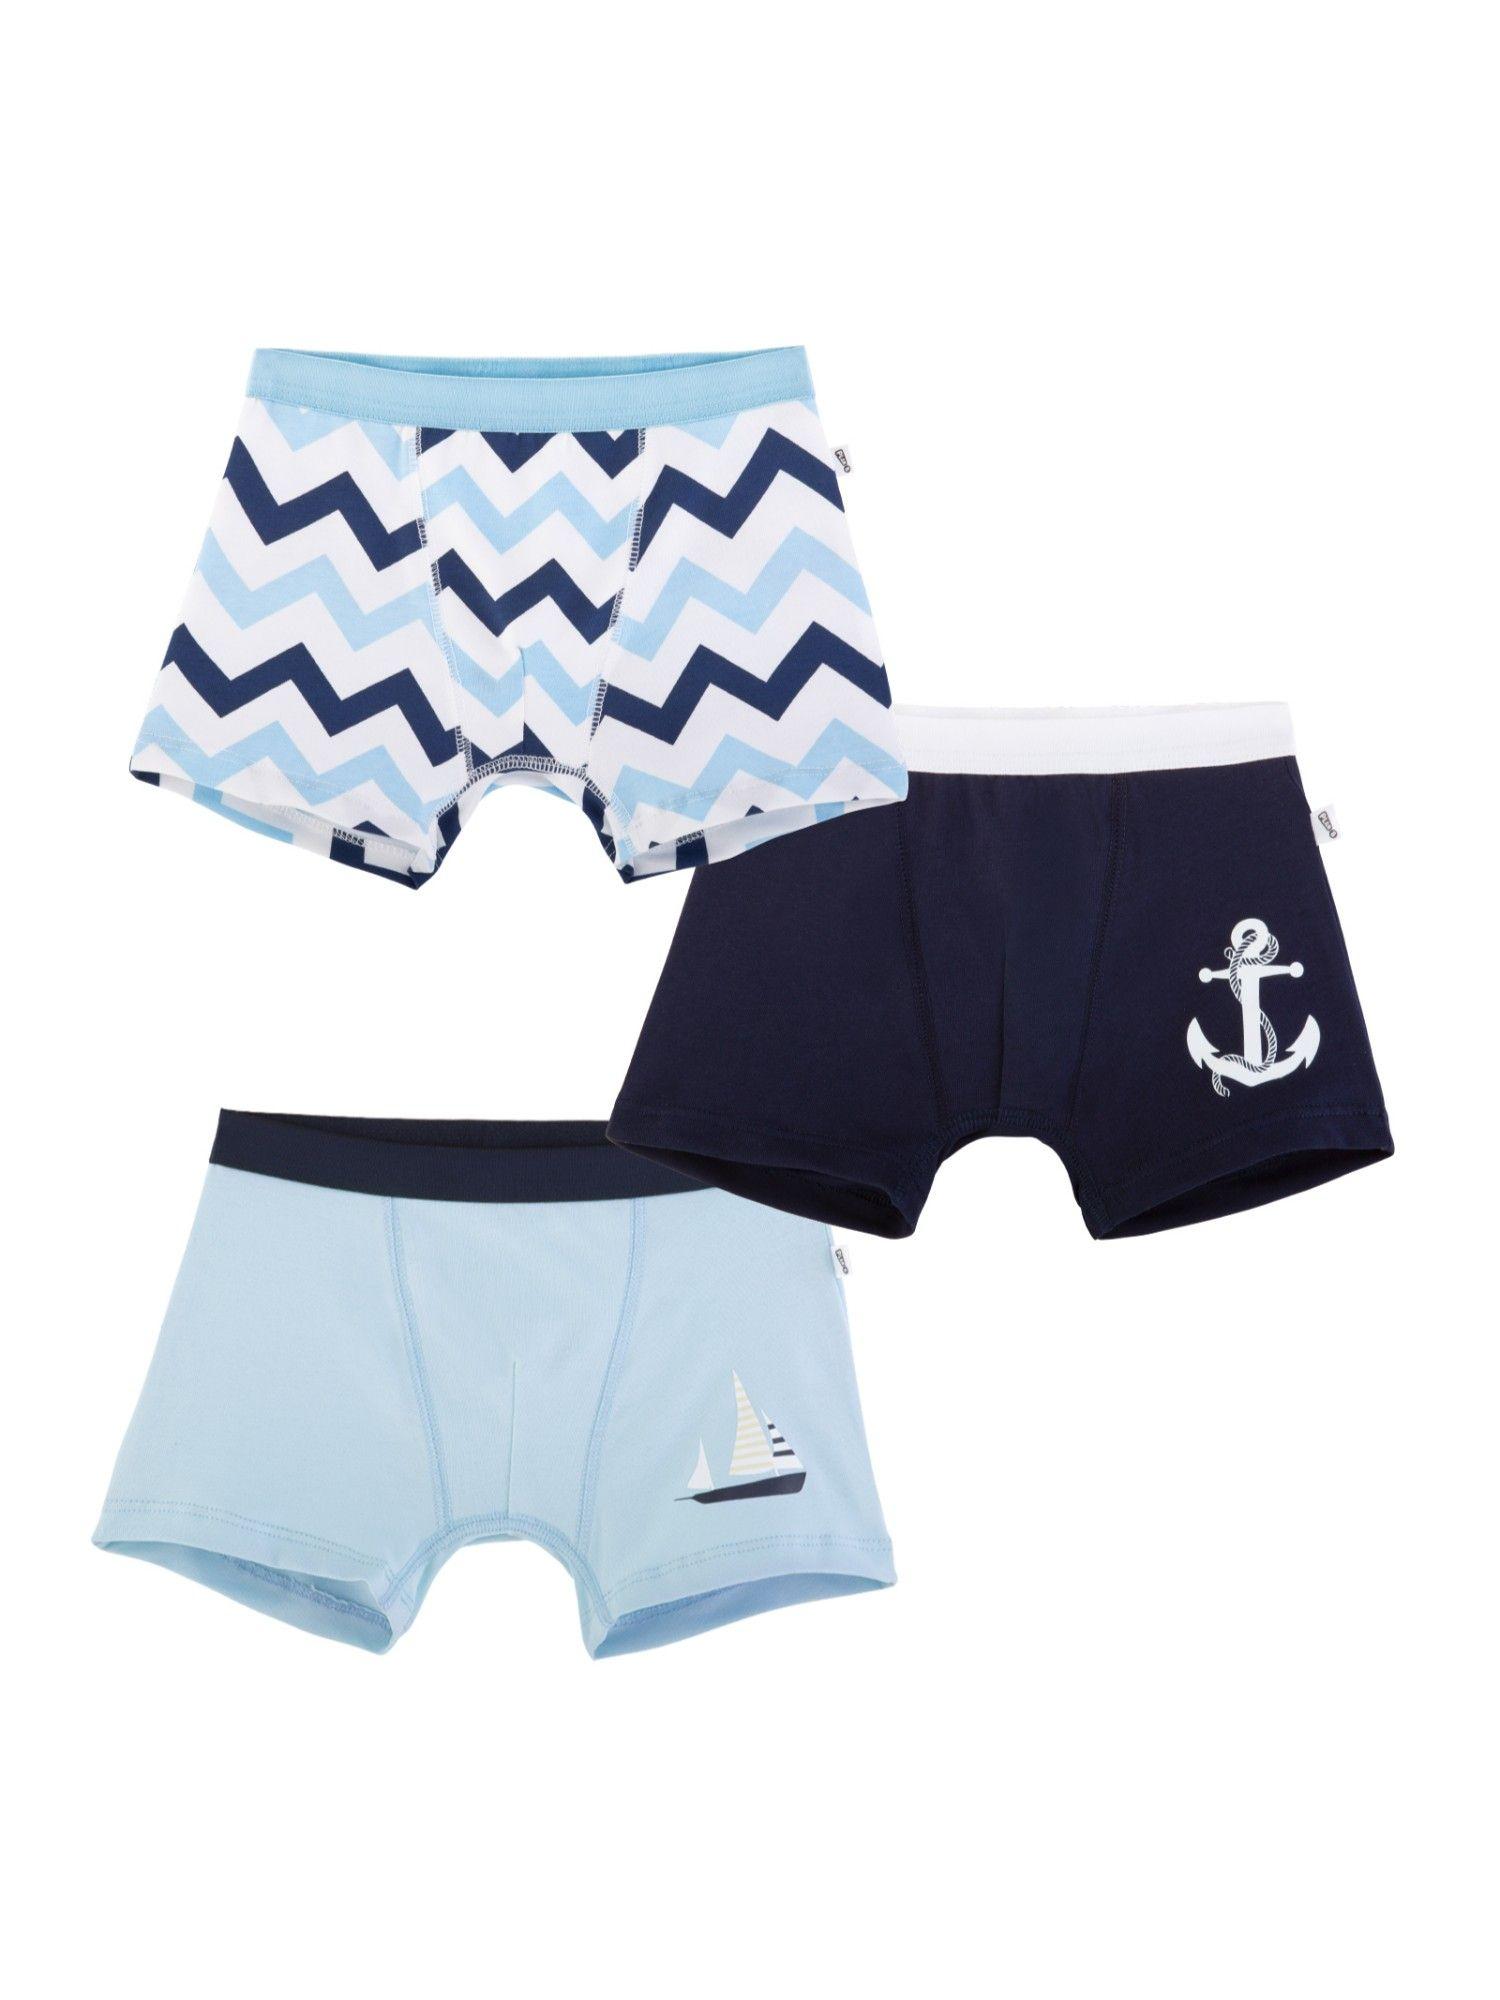 nautical boy trunks (pack of 3)